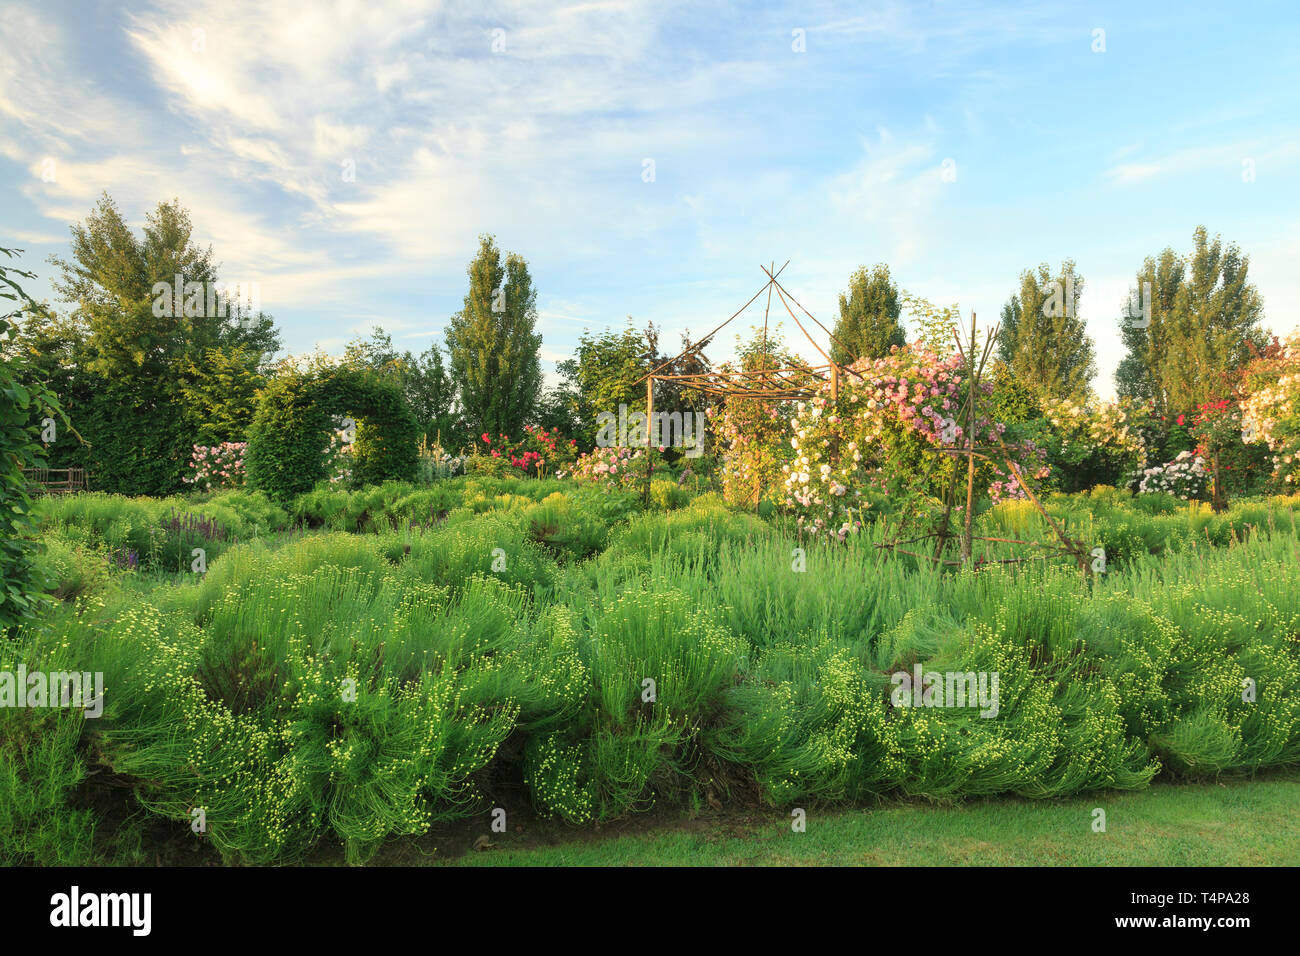 Roquelin’s gardens, Les jardins de Roquelin, France : green Santolina flowerbed (Santolina rosmarinifolia) with in the center a wooden gloriette and t Stock Photo